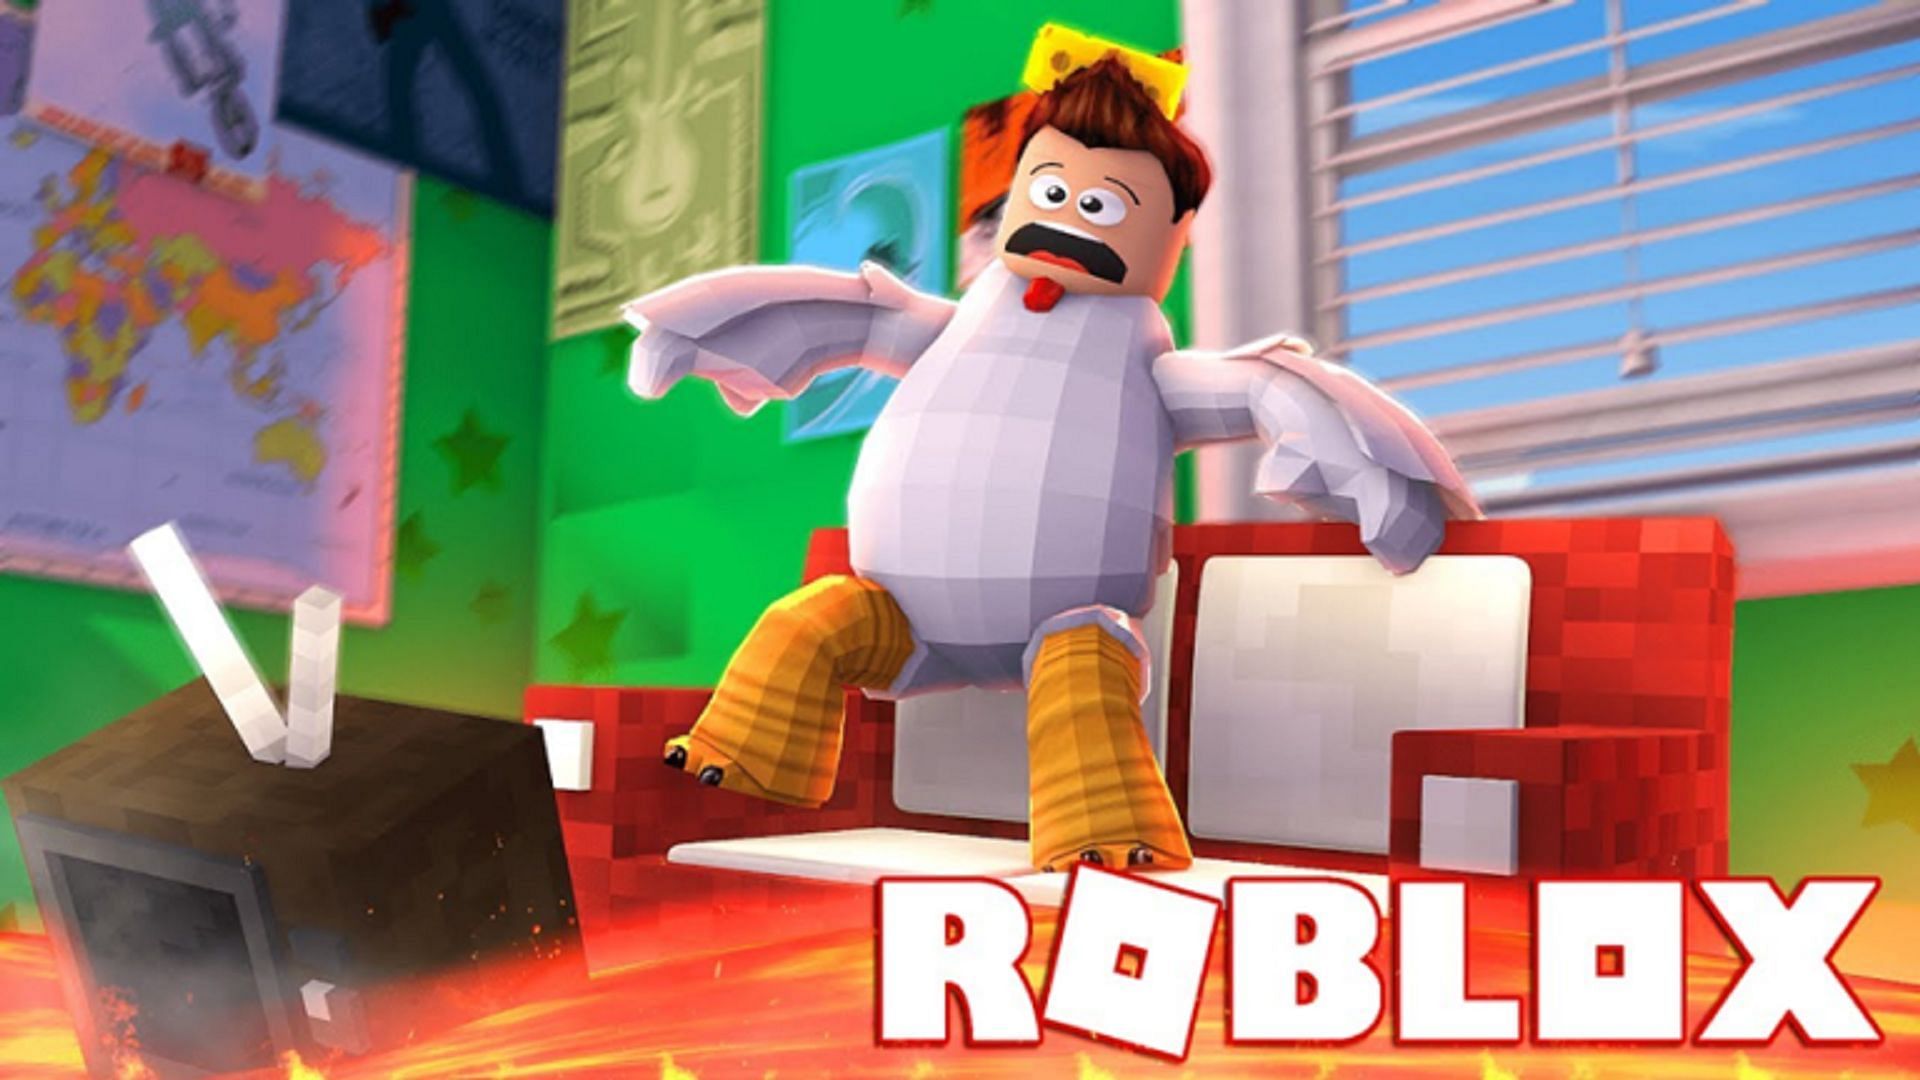 Brand new codes for The Floor is Lava (Image via Roblox)